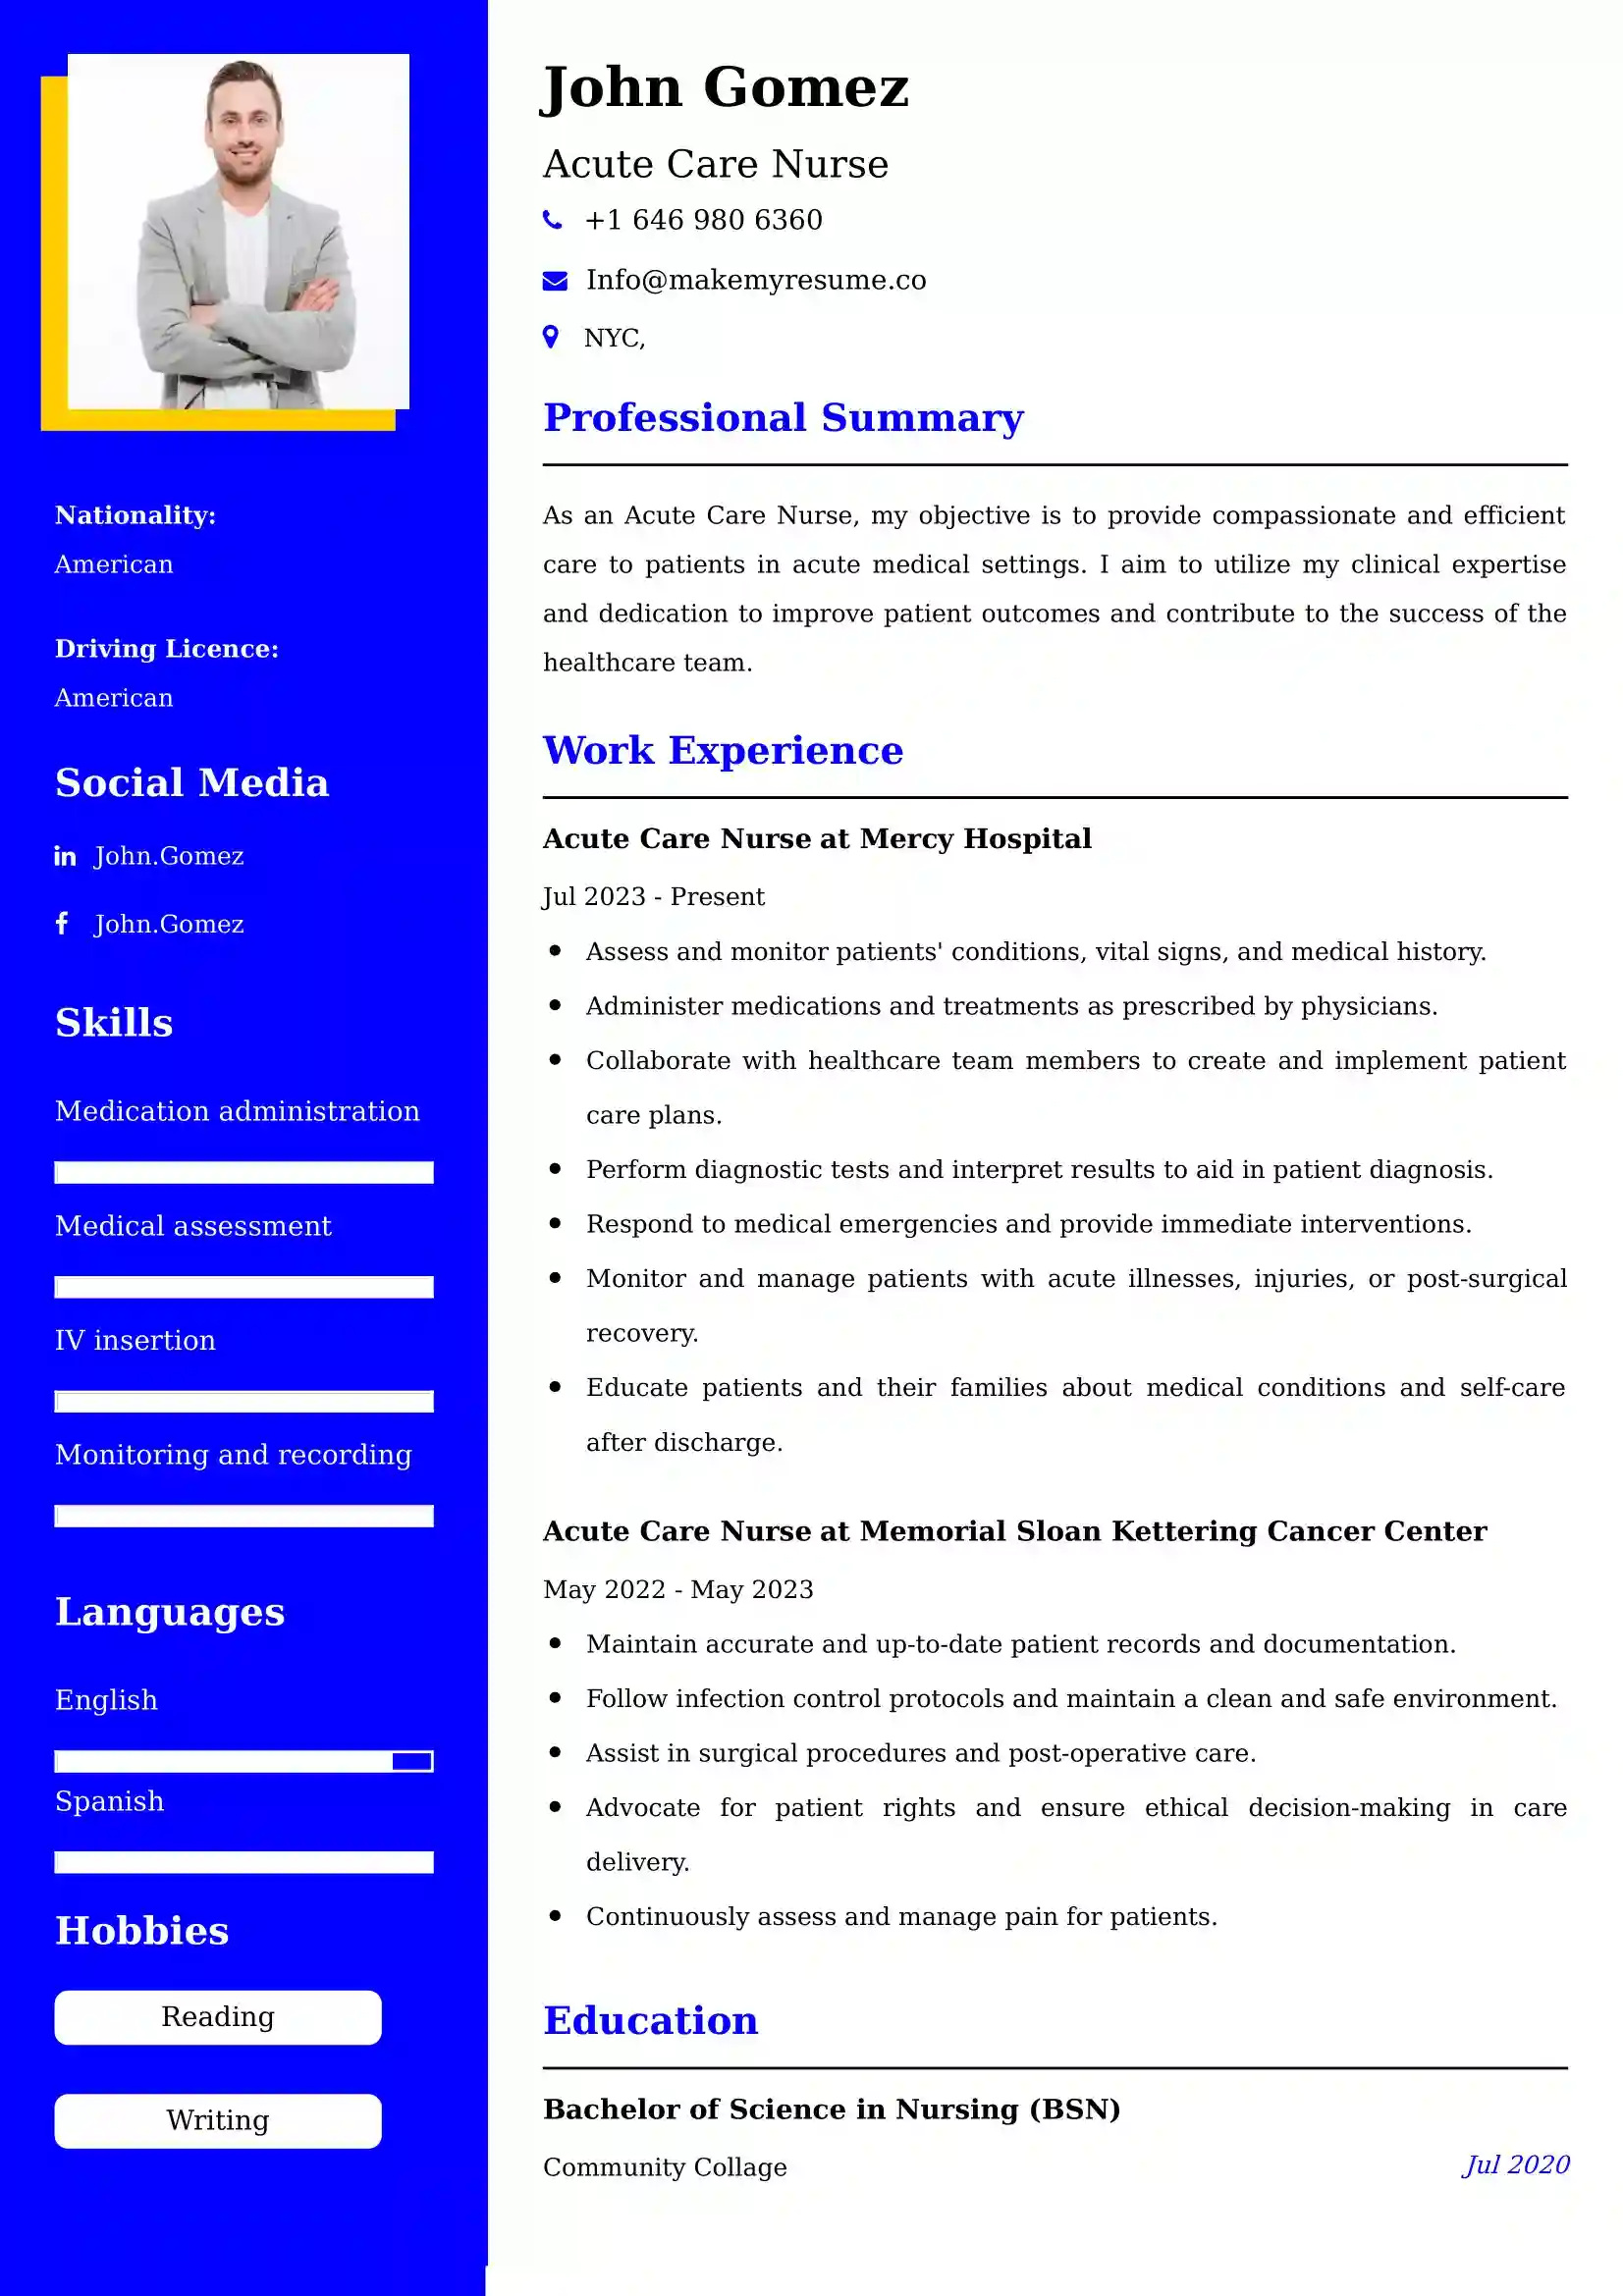 Acute Care Nurse Resume Examples for UK Jobs - Tips and Guide